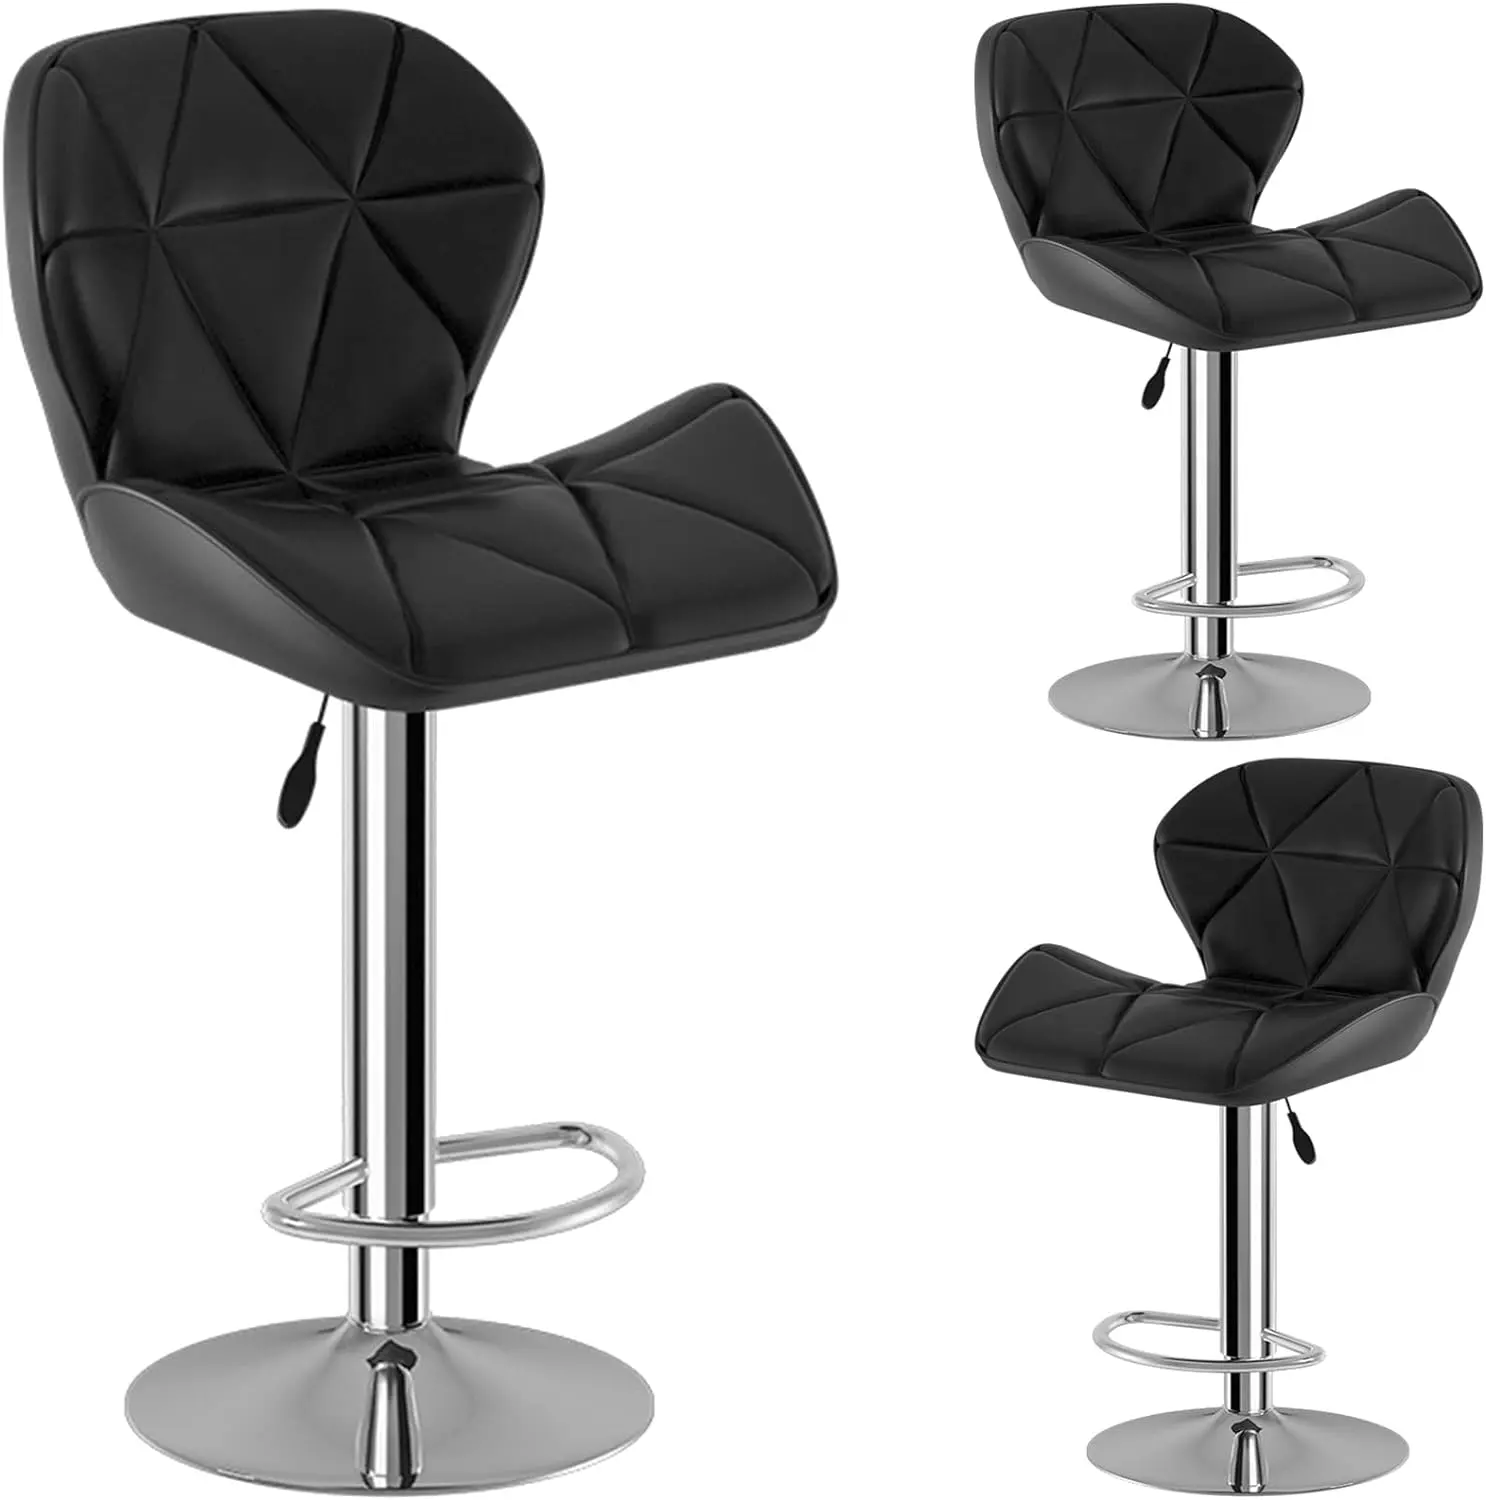 Bar Stool Black Bar Stools Swivel Adjustable Chairs With Footrest Pu Backrest Seat Modern Furniture Office Counter High Barstool